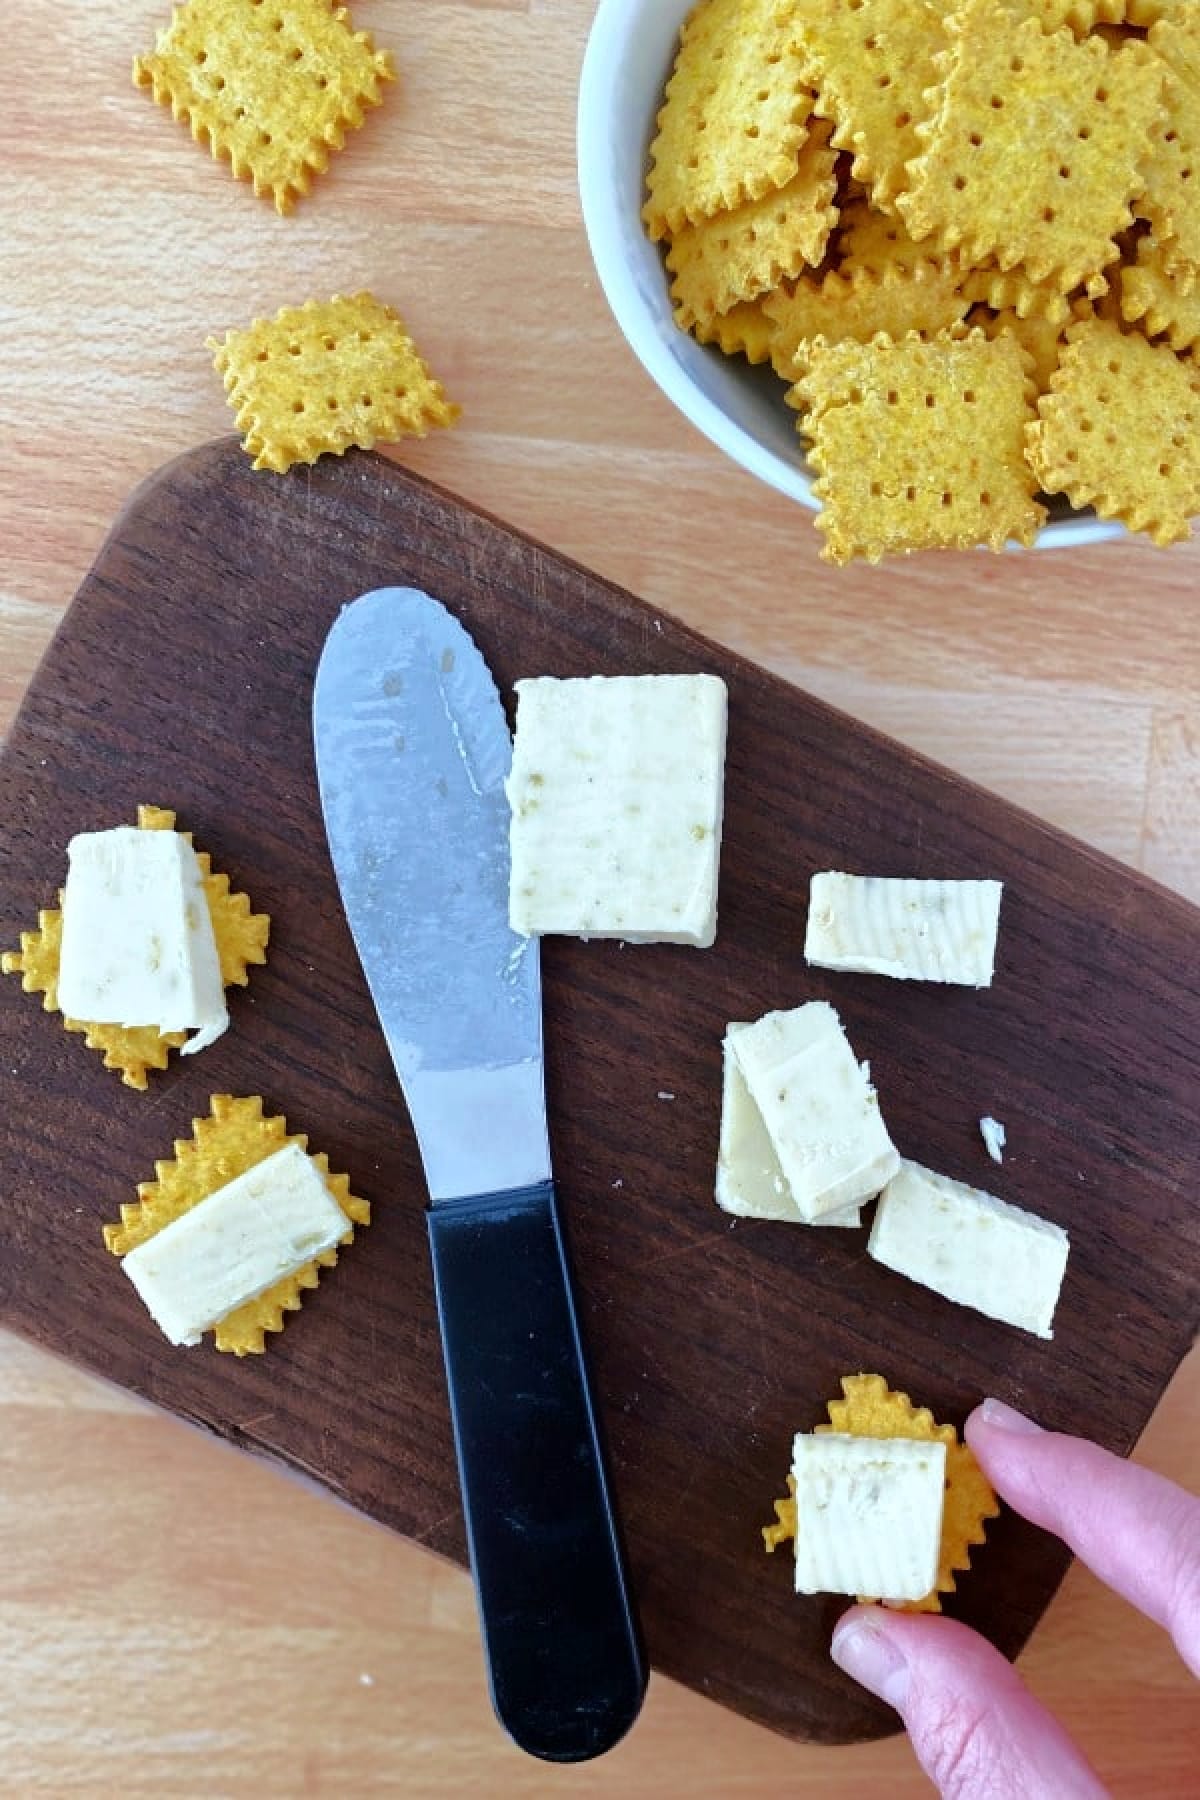 A board with vegan cheese crackers, cheese, and a knife.